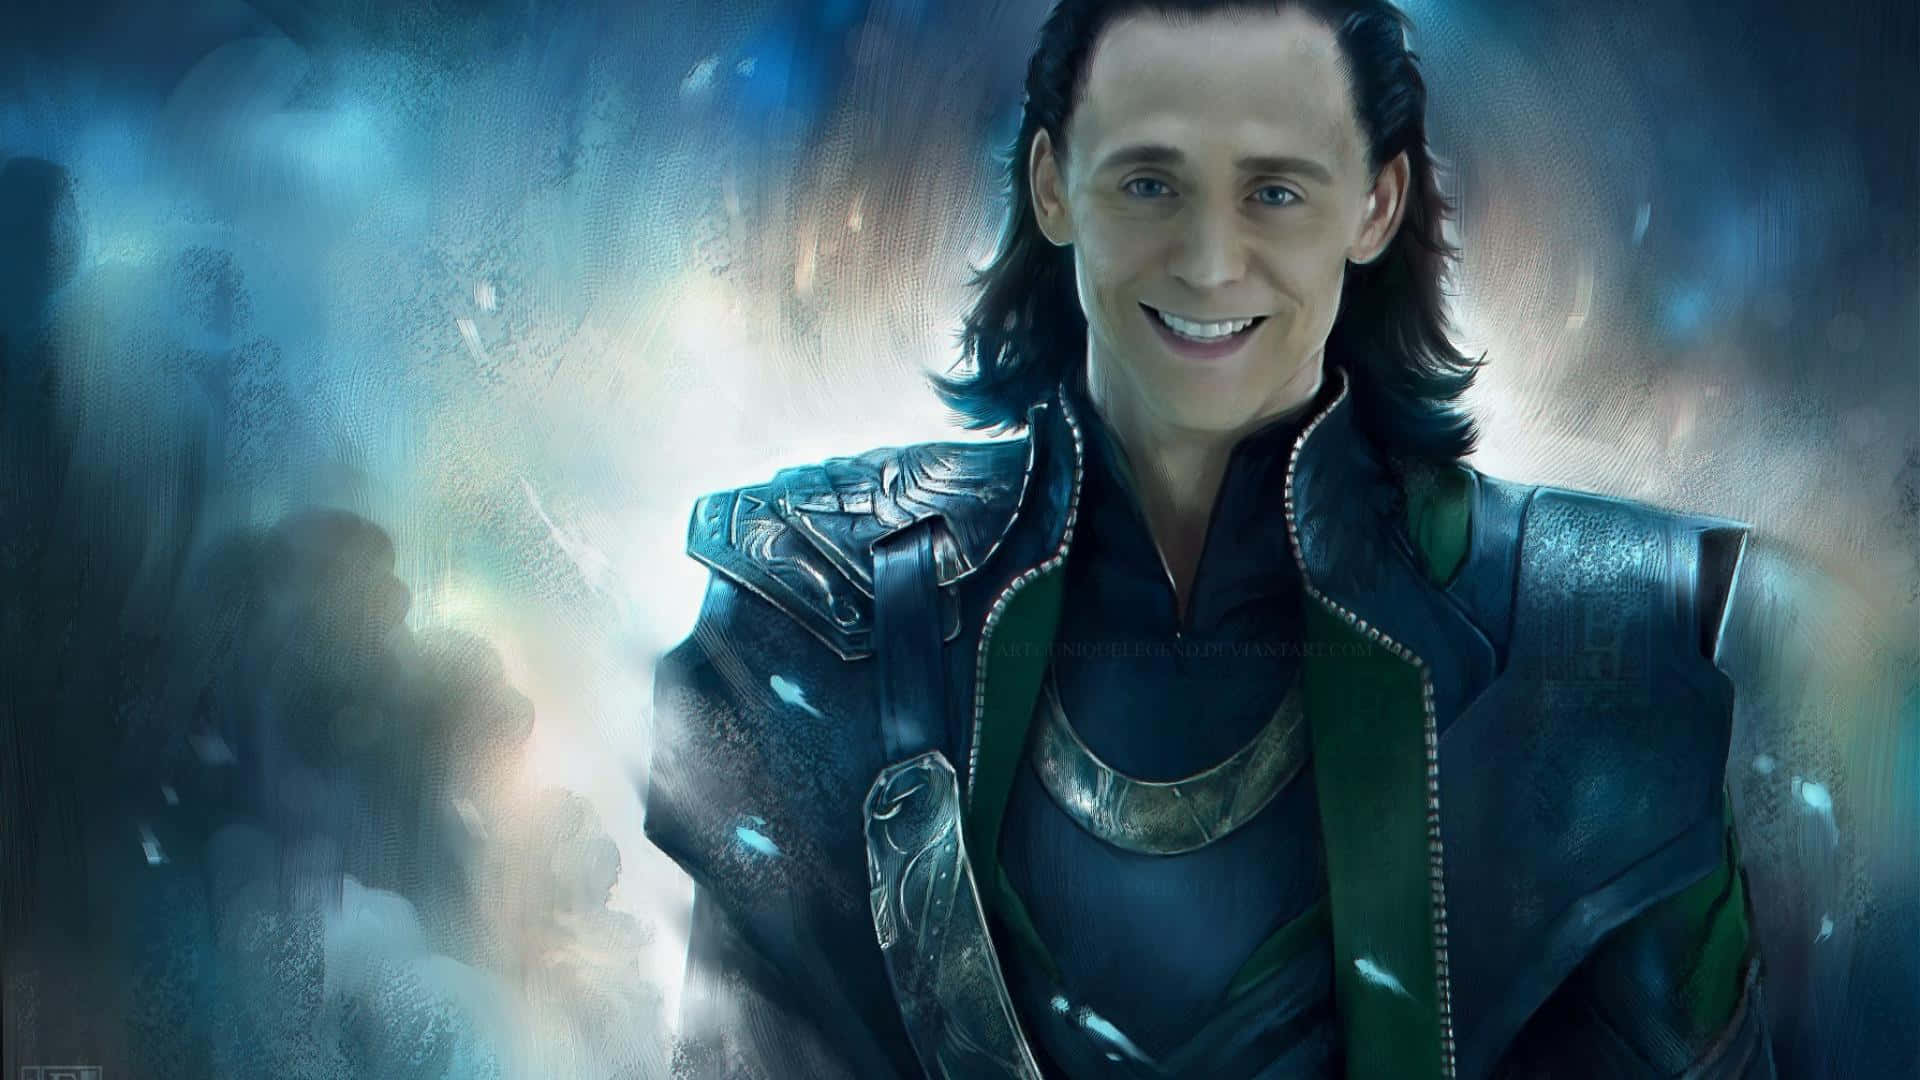 Tom Hiddleston as Loki from the Marvel Cinematic Universe.